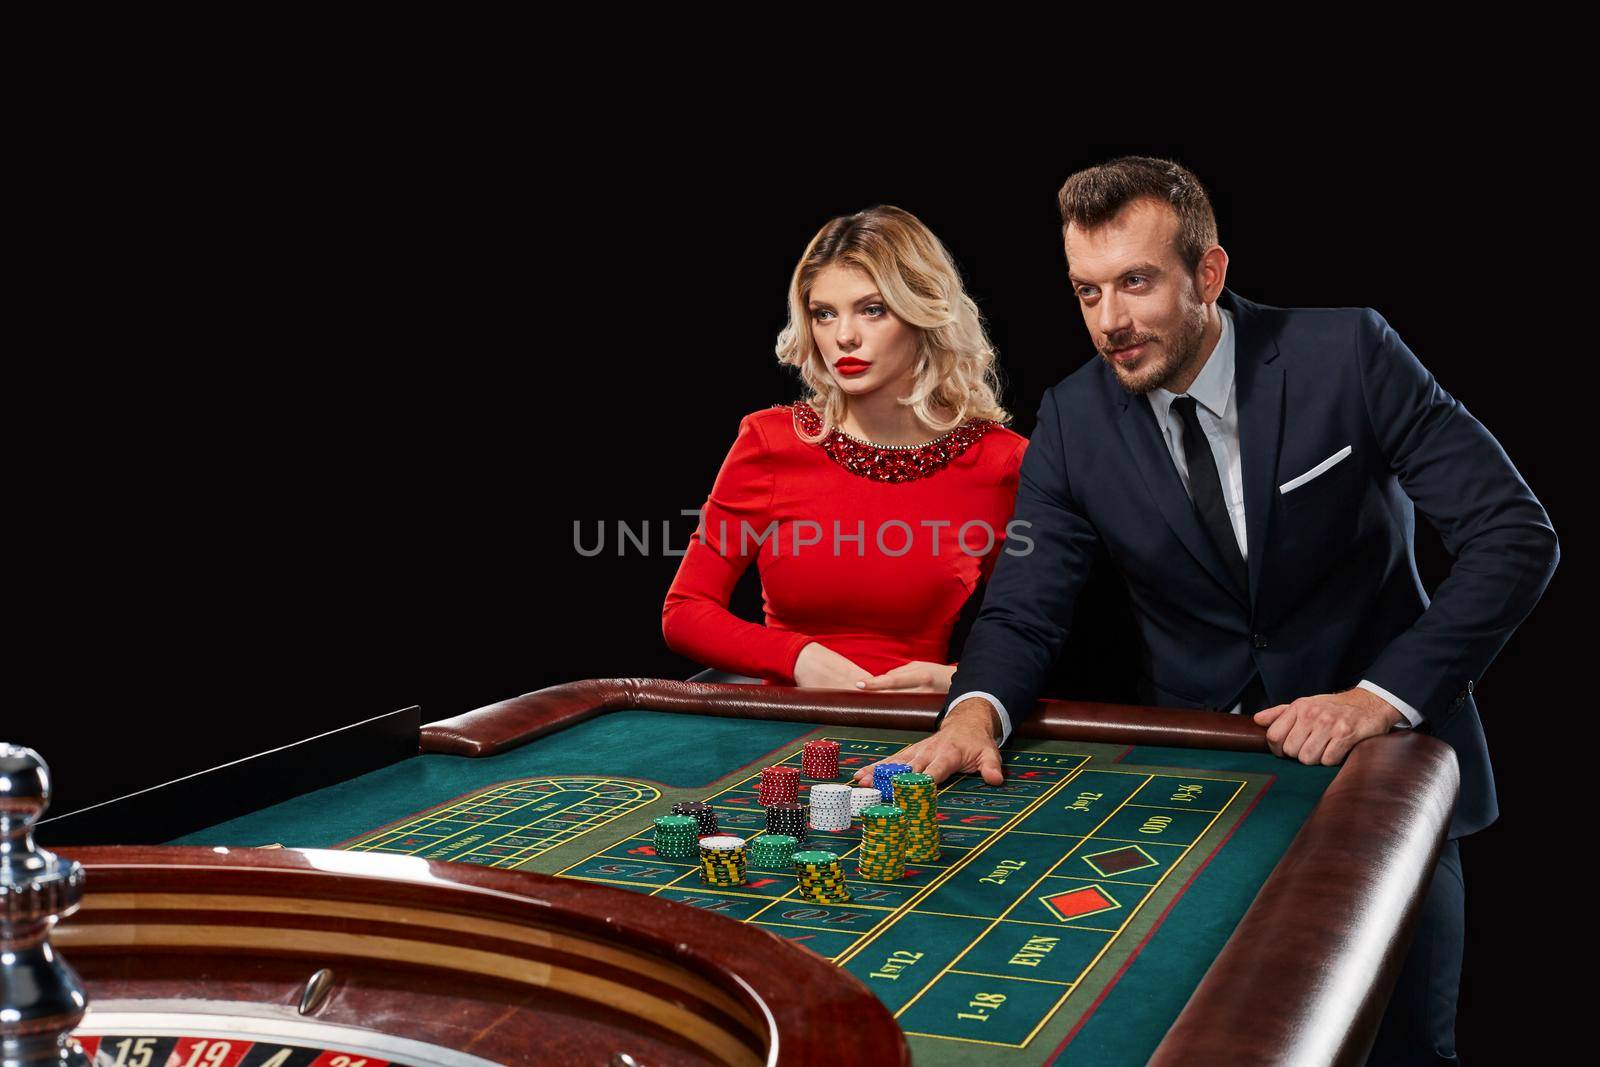 Couple playing roulette wins at the casino. Addiction to the gambling. he bets chips